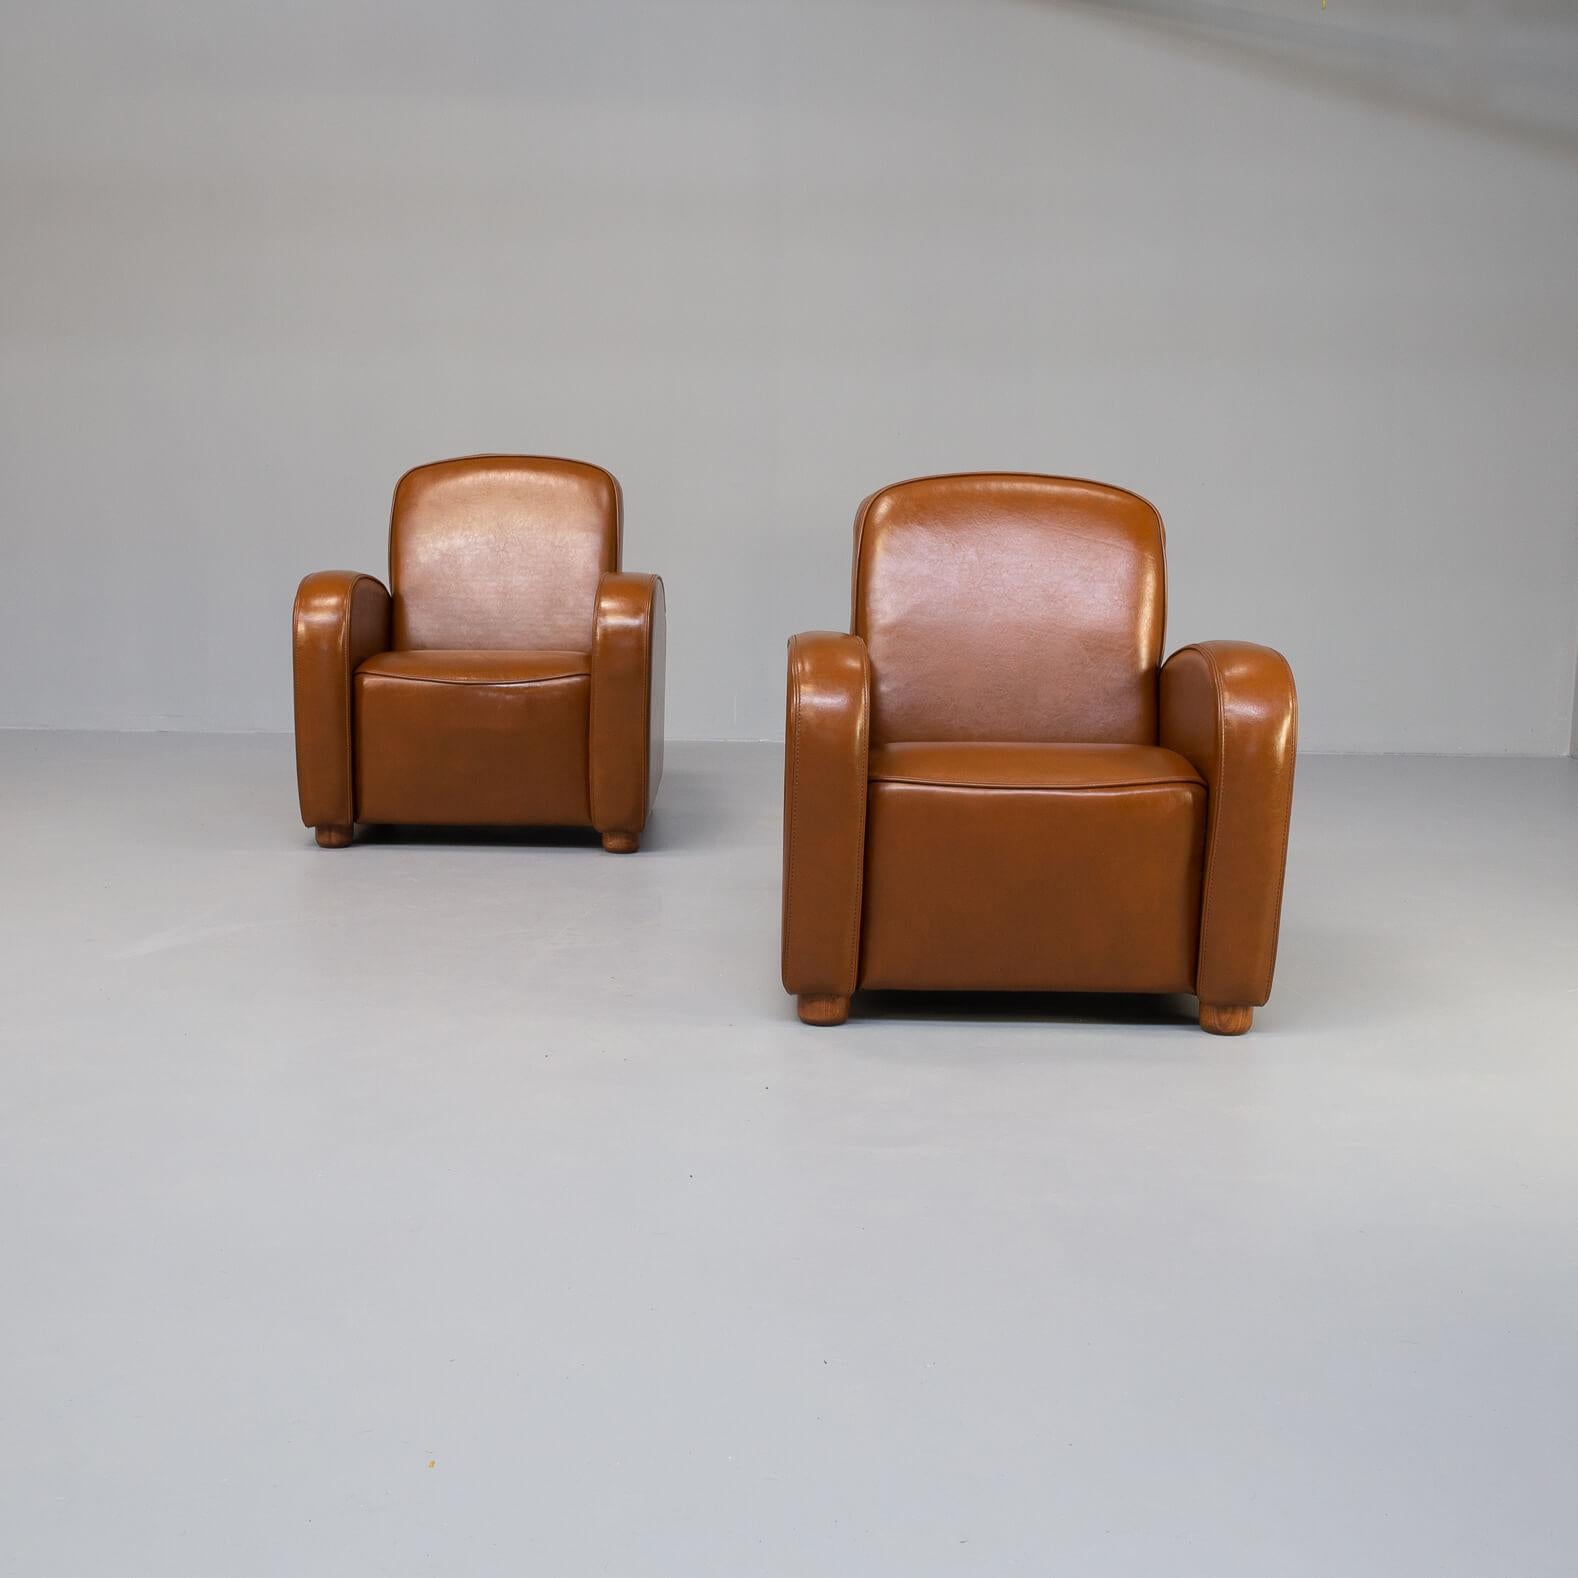 Post-Modern 80s Cognac Leather Club Fauteuils for Idp Italia Set / 2 For Sale